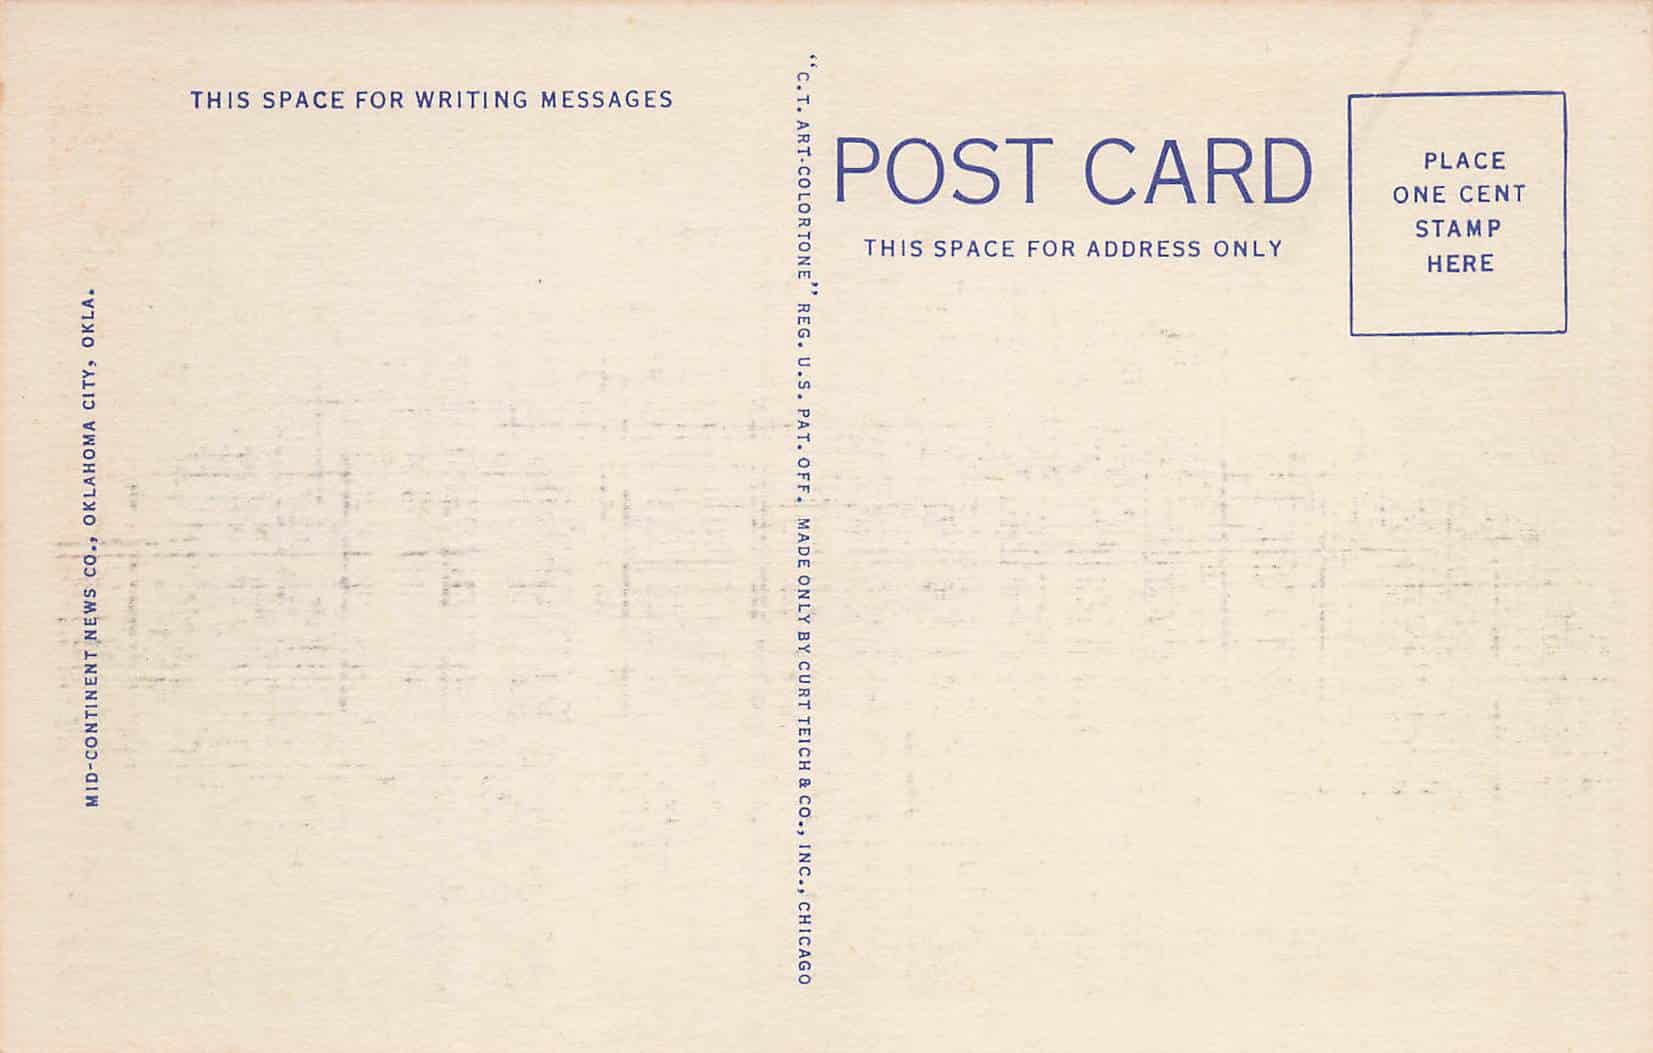 A post card with a blue and white design.